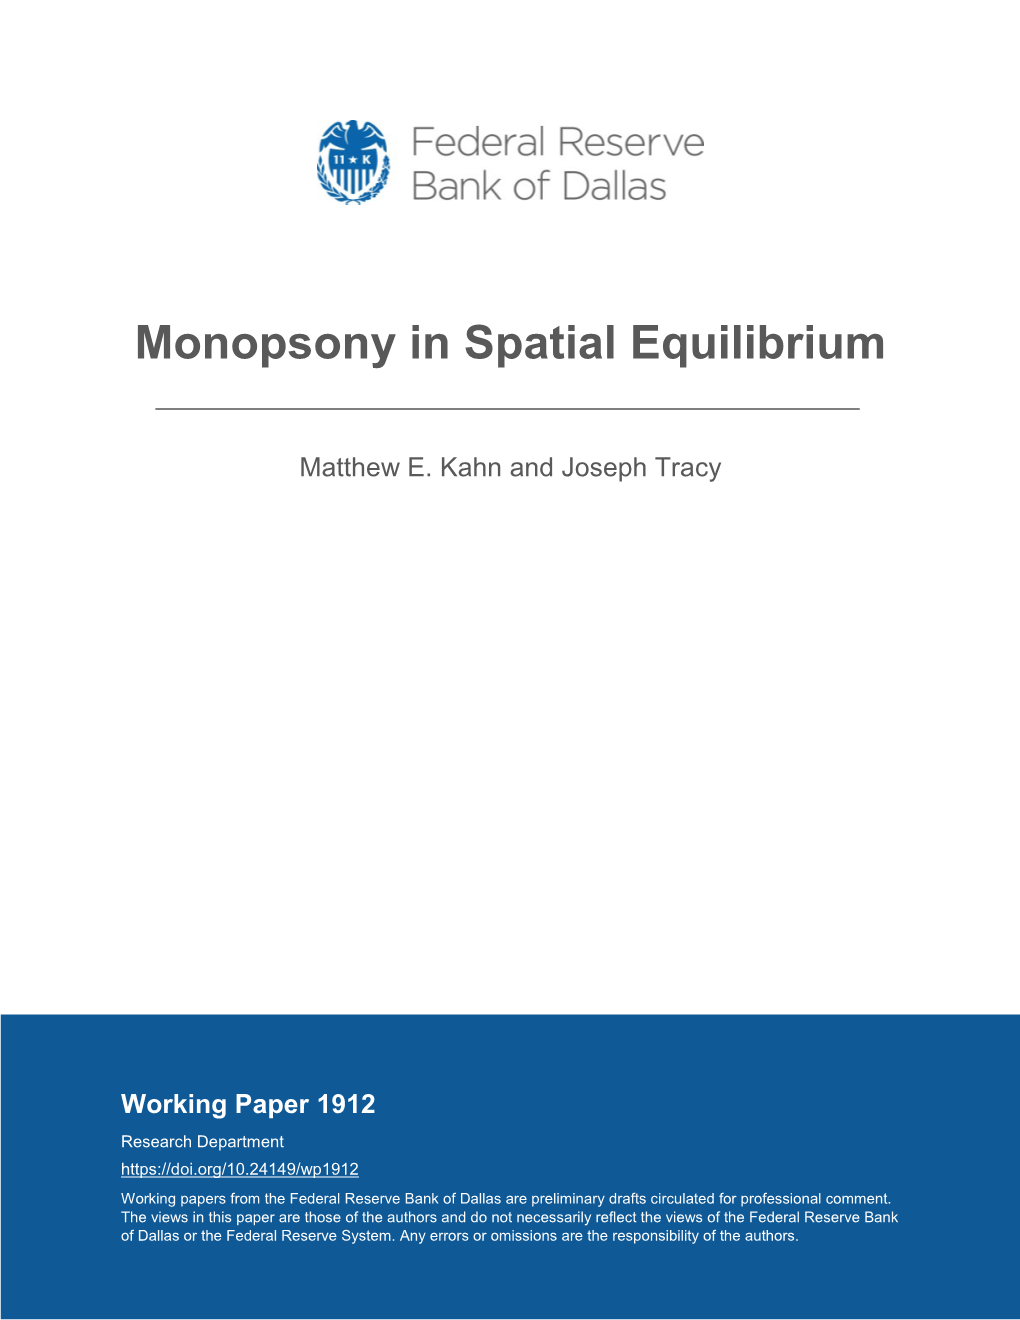 Monopsony in Spatial Equilibrium